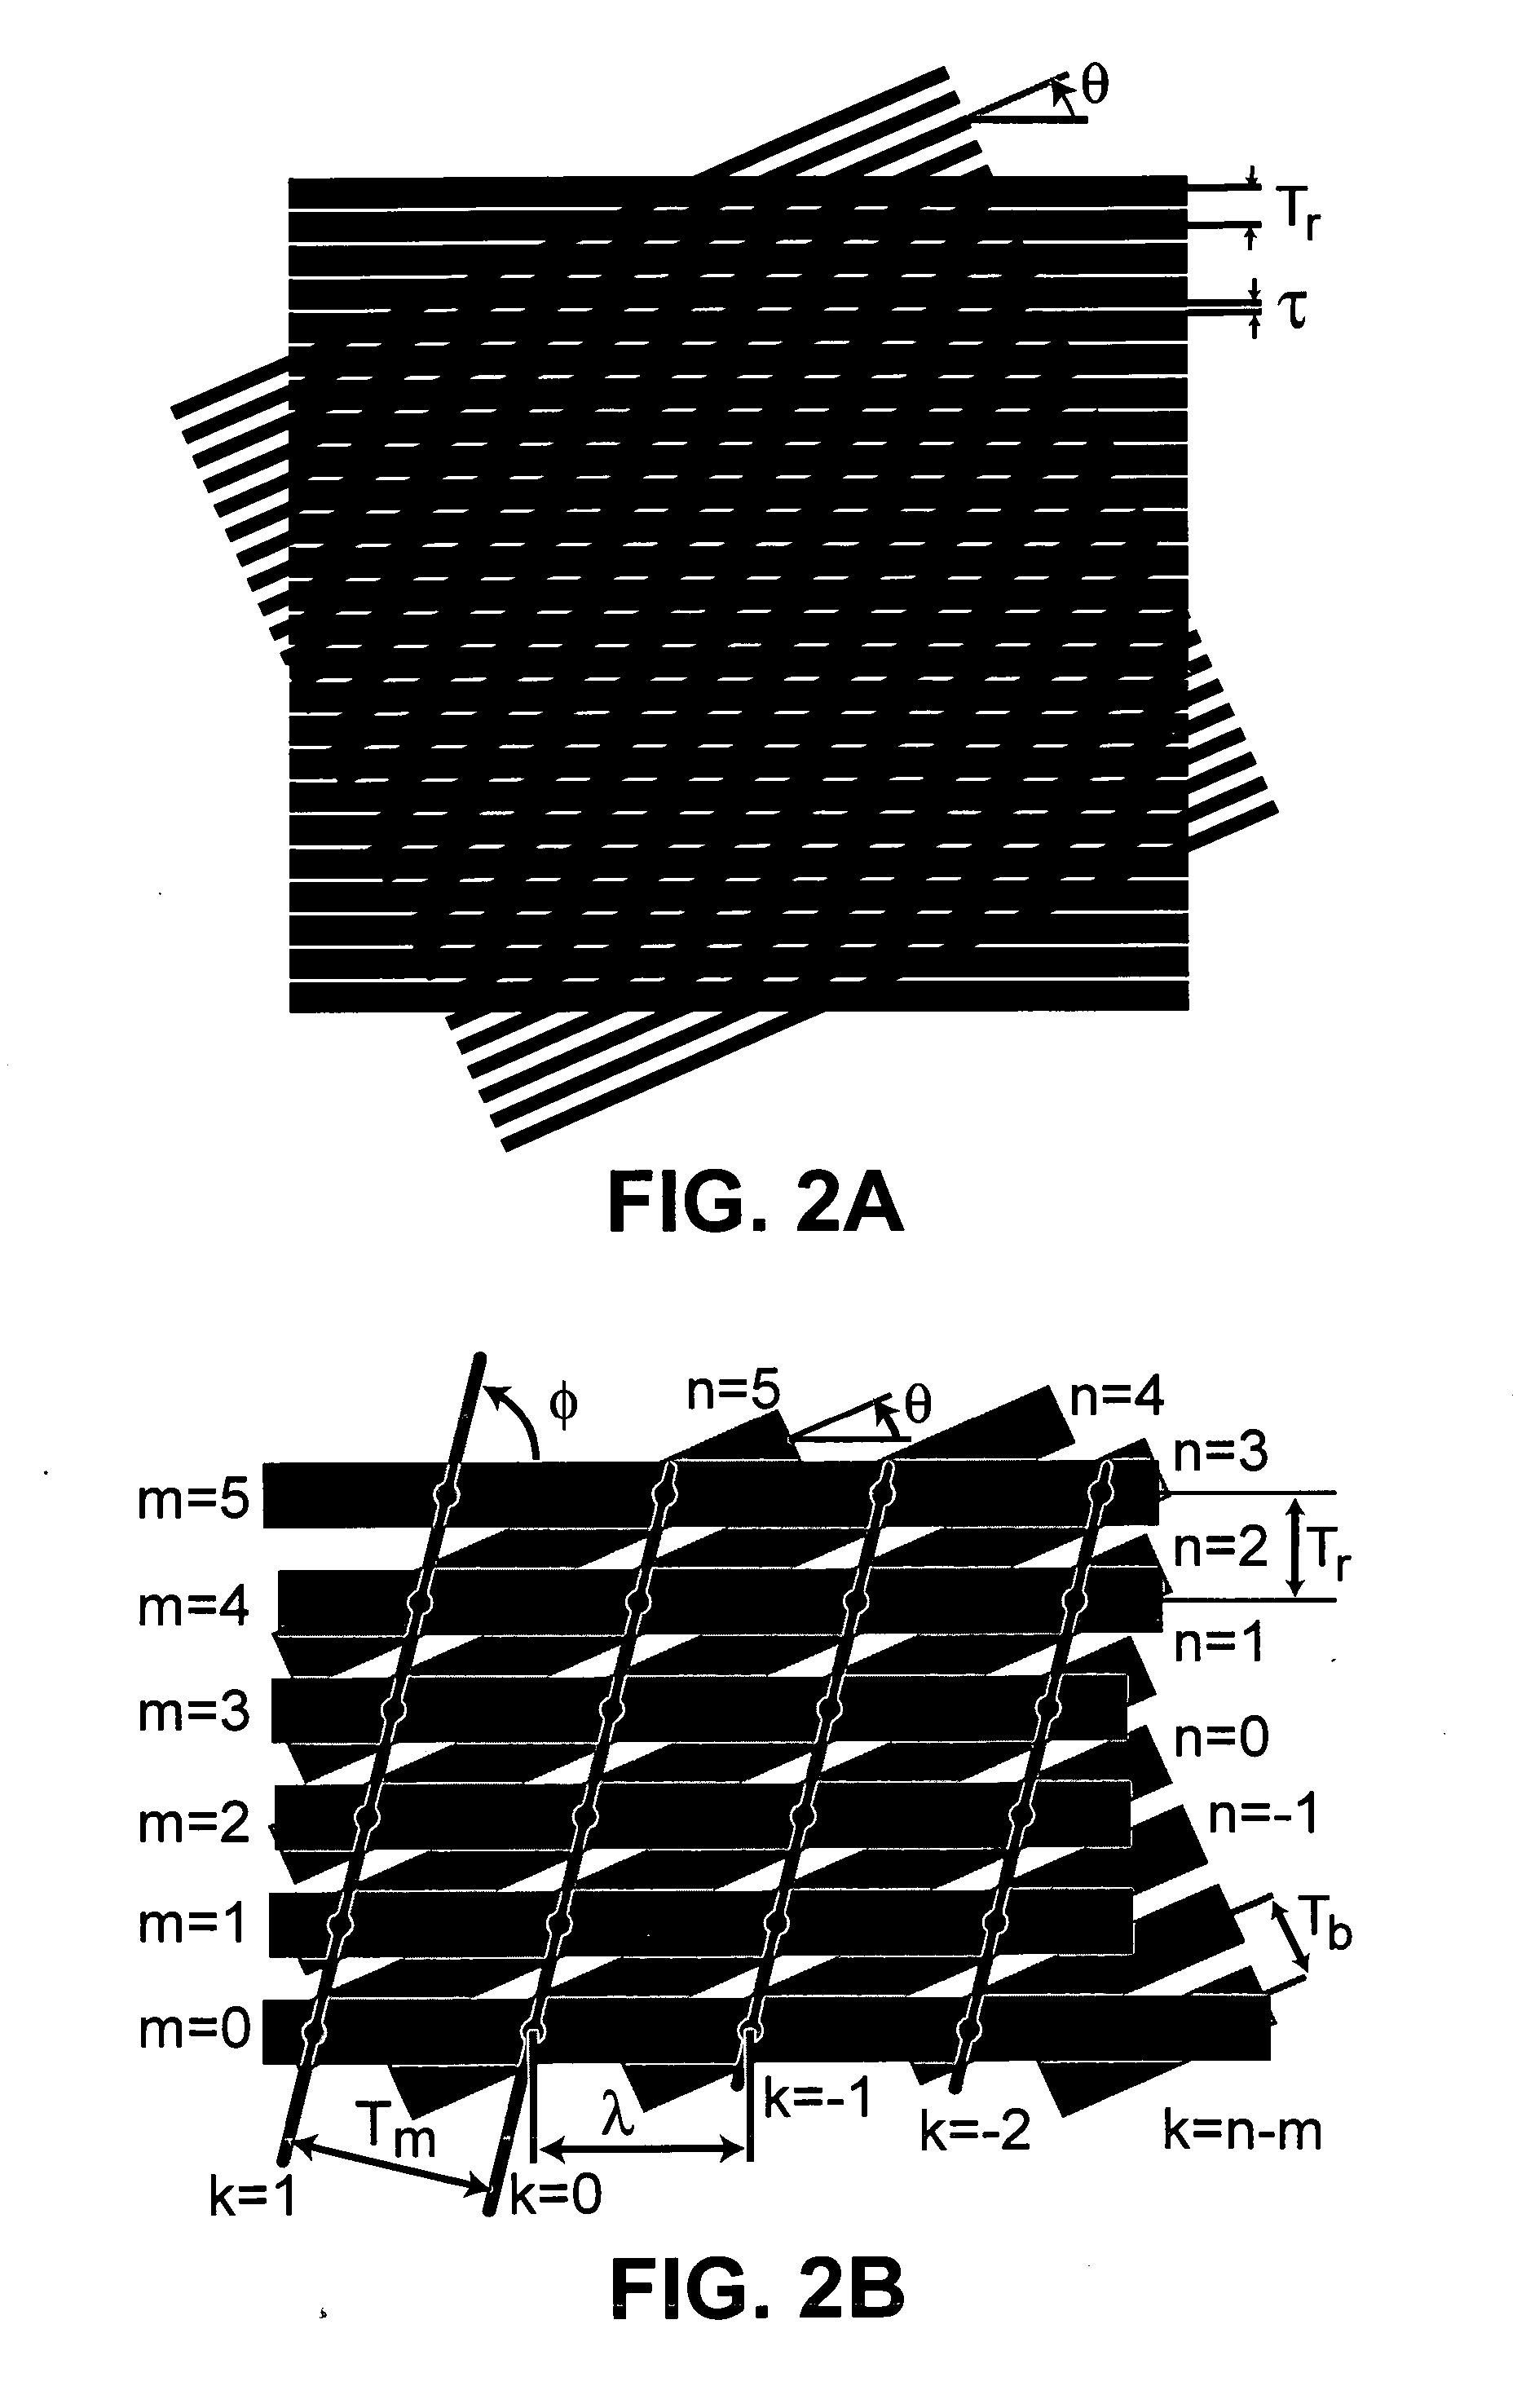 Model-based synthesis of band moire images for authentication purposes